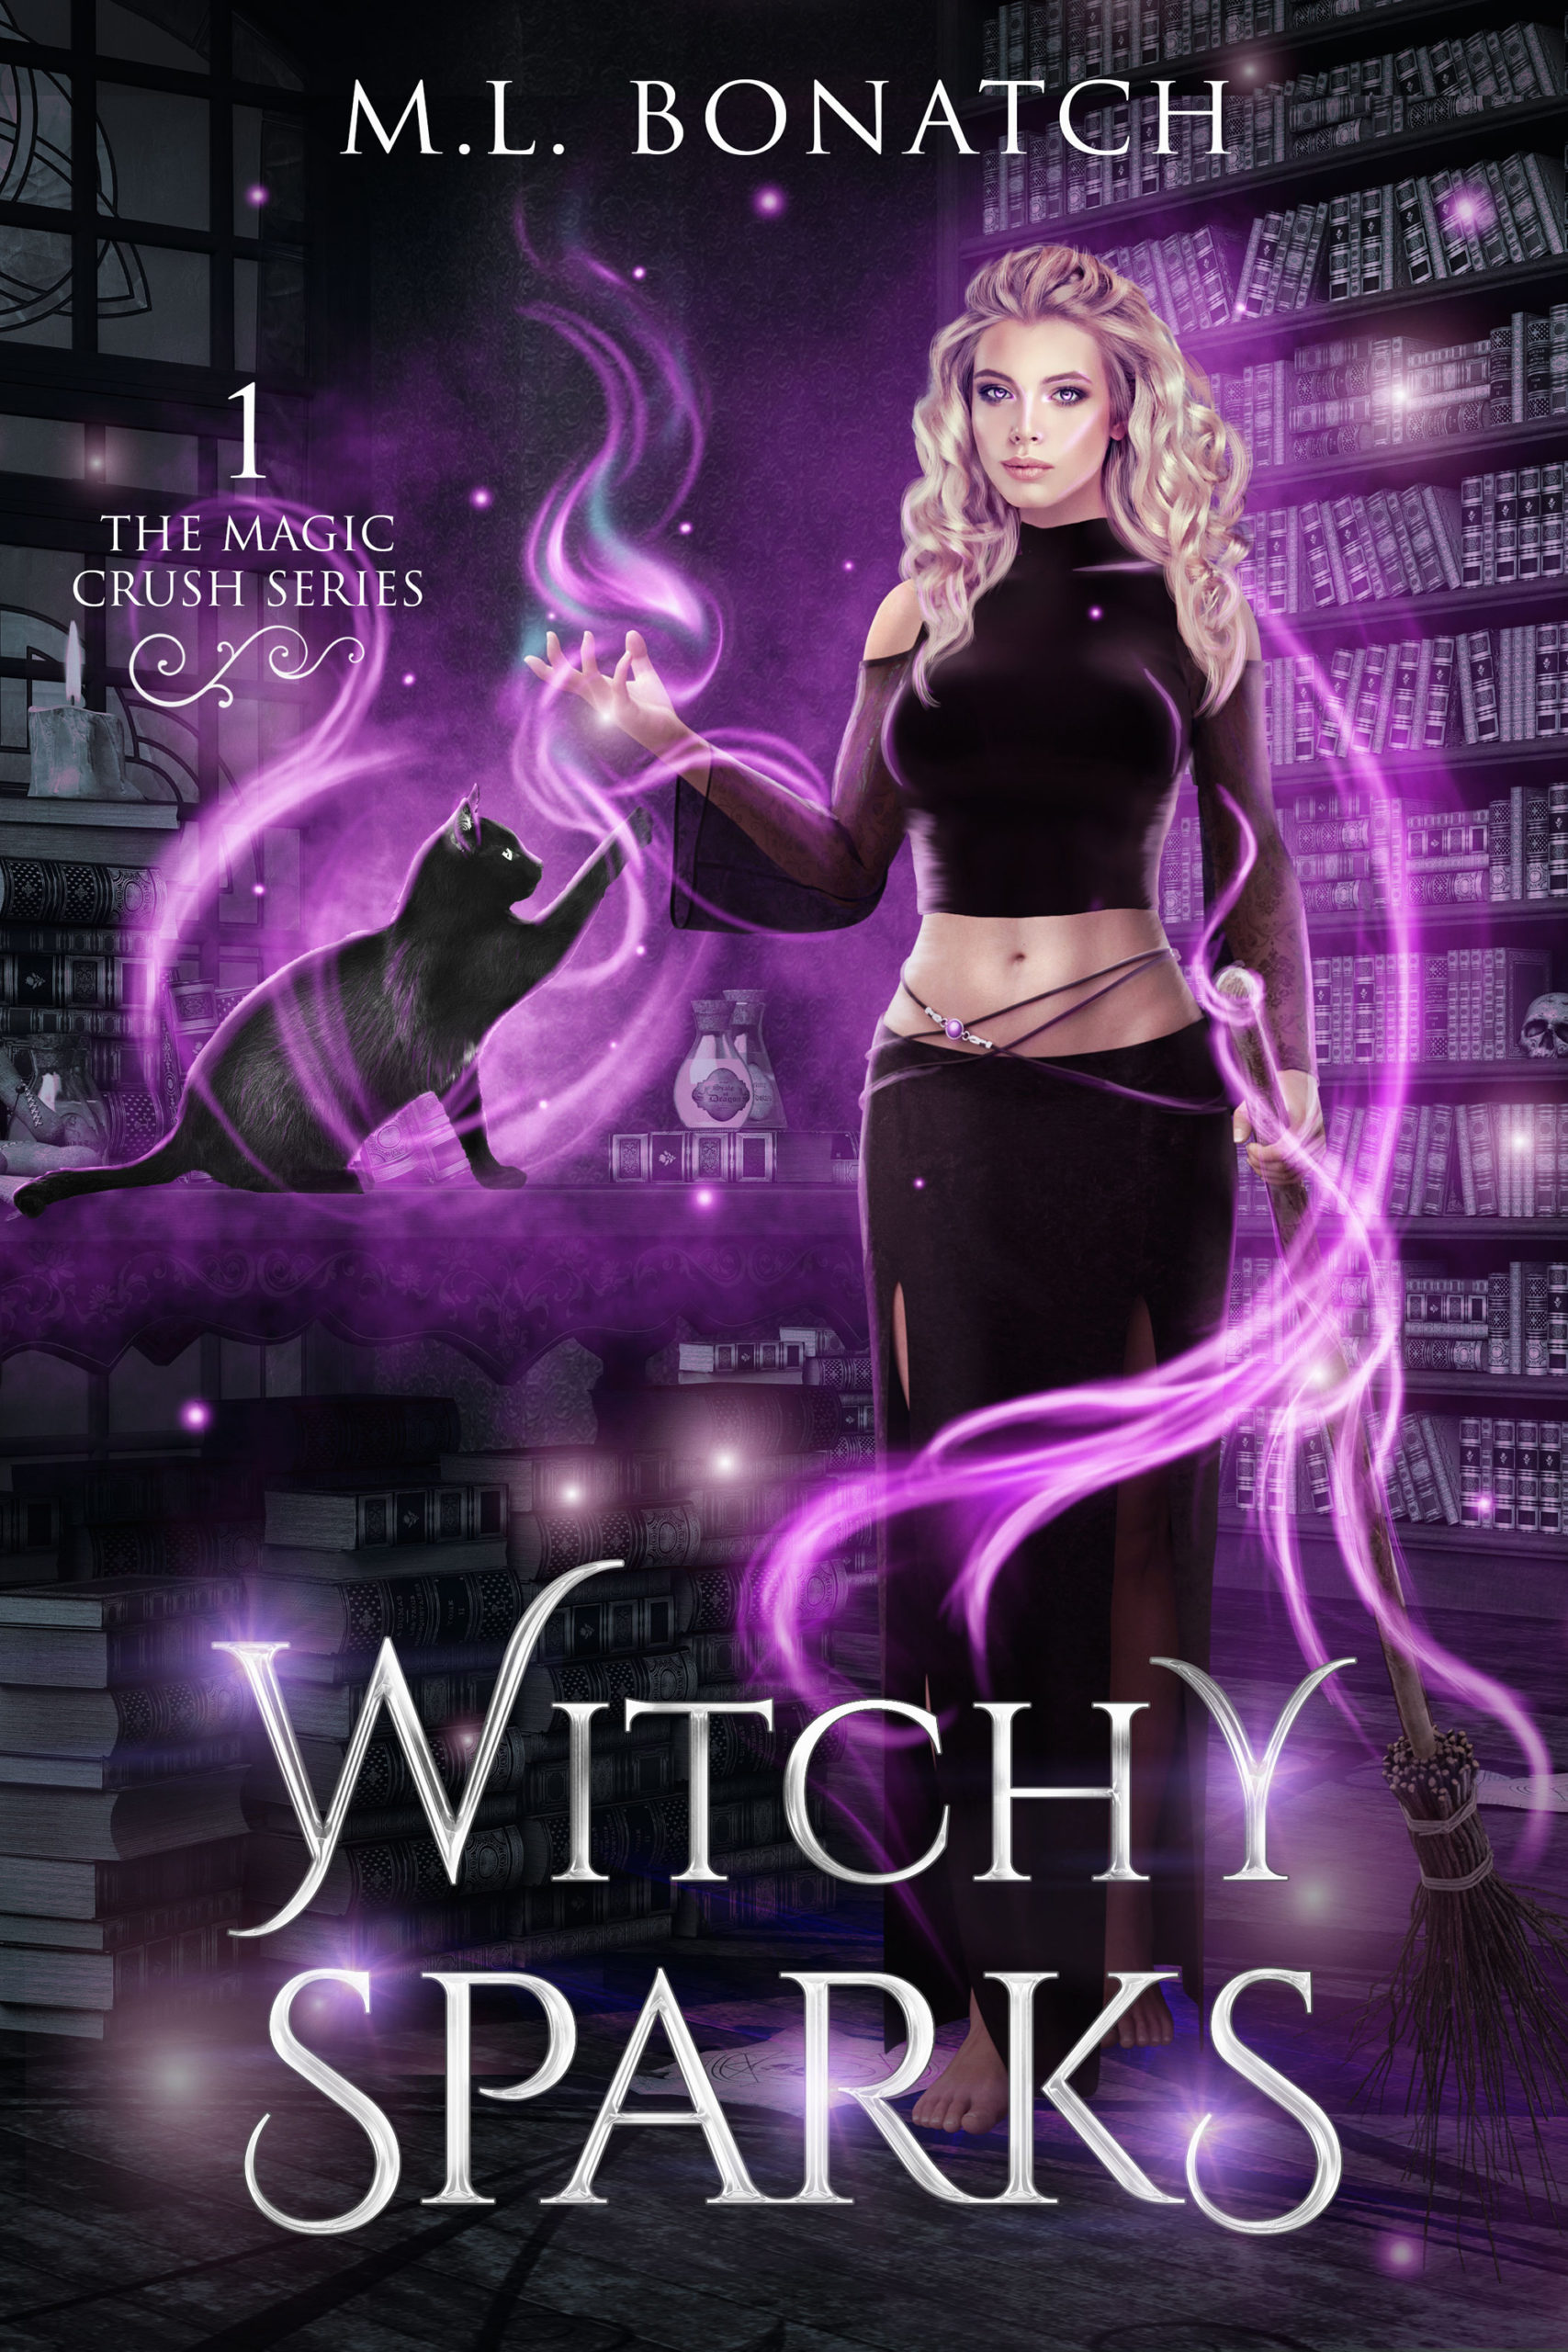 Witchy Sparks, Paranormal Romance